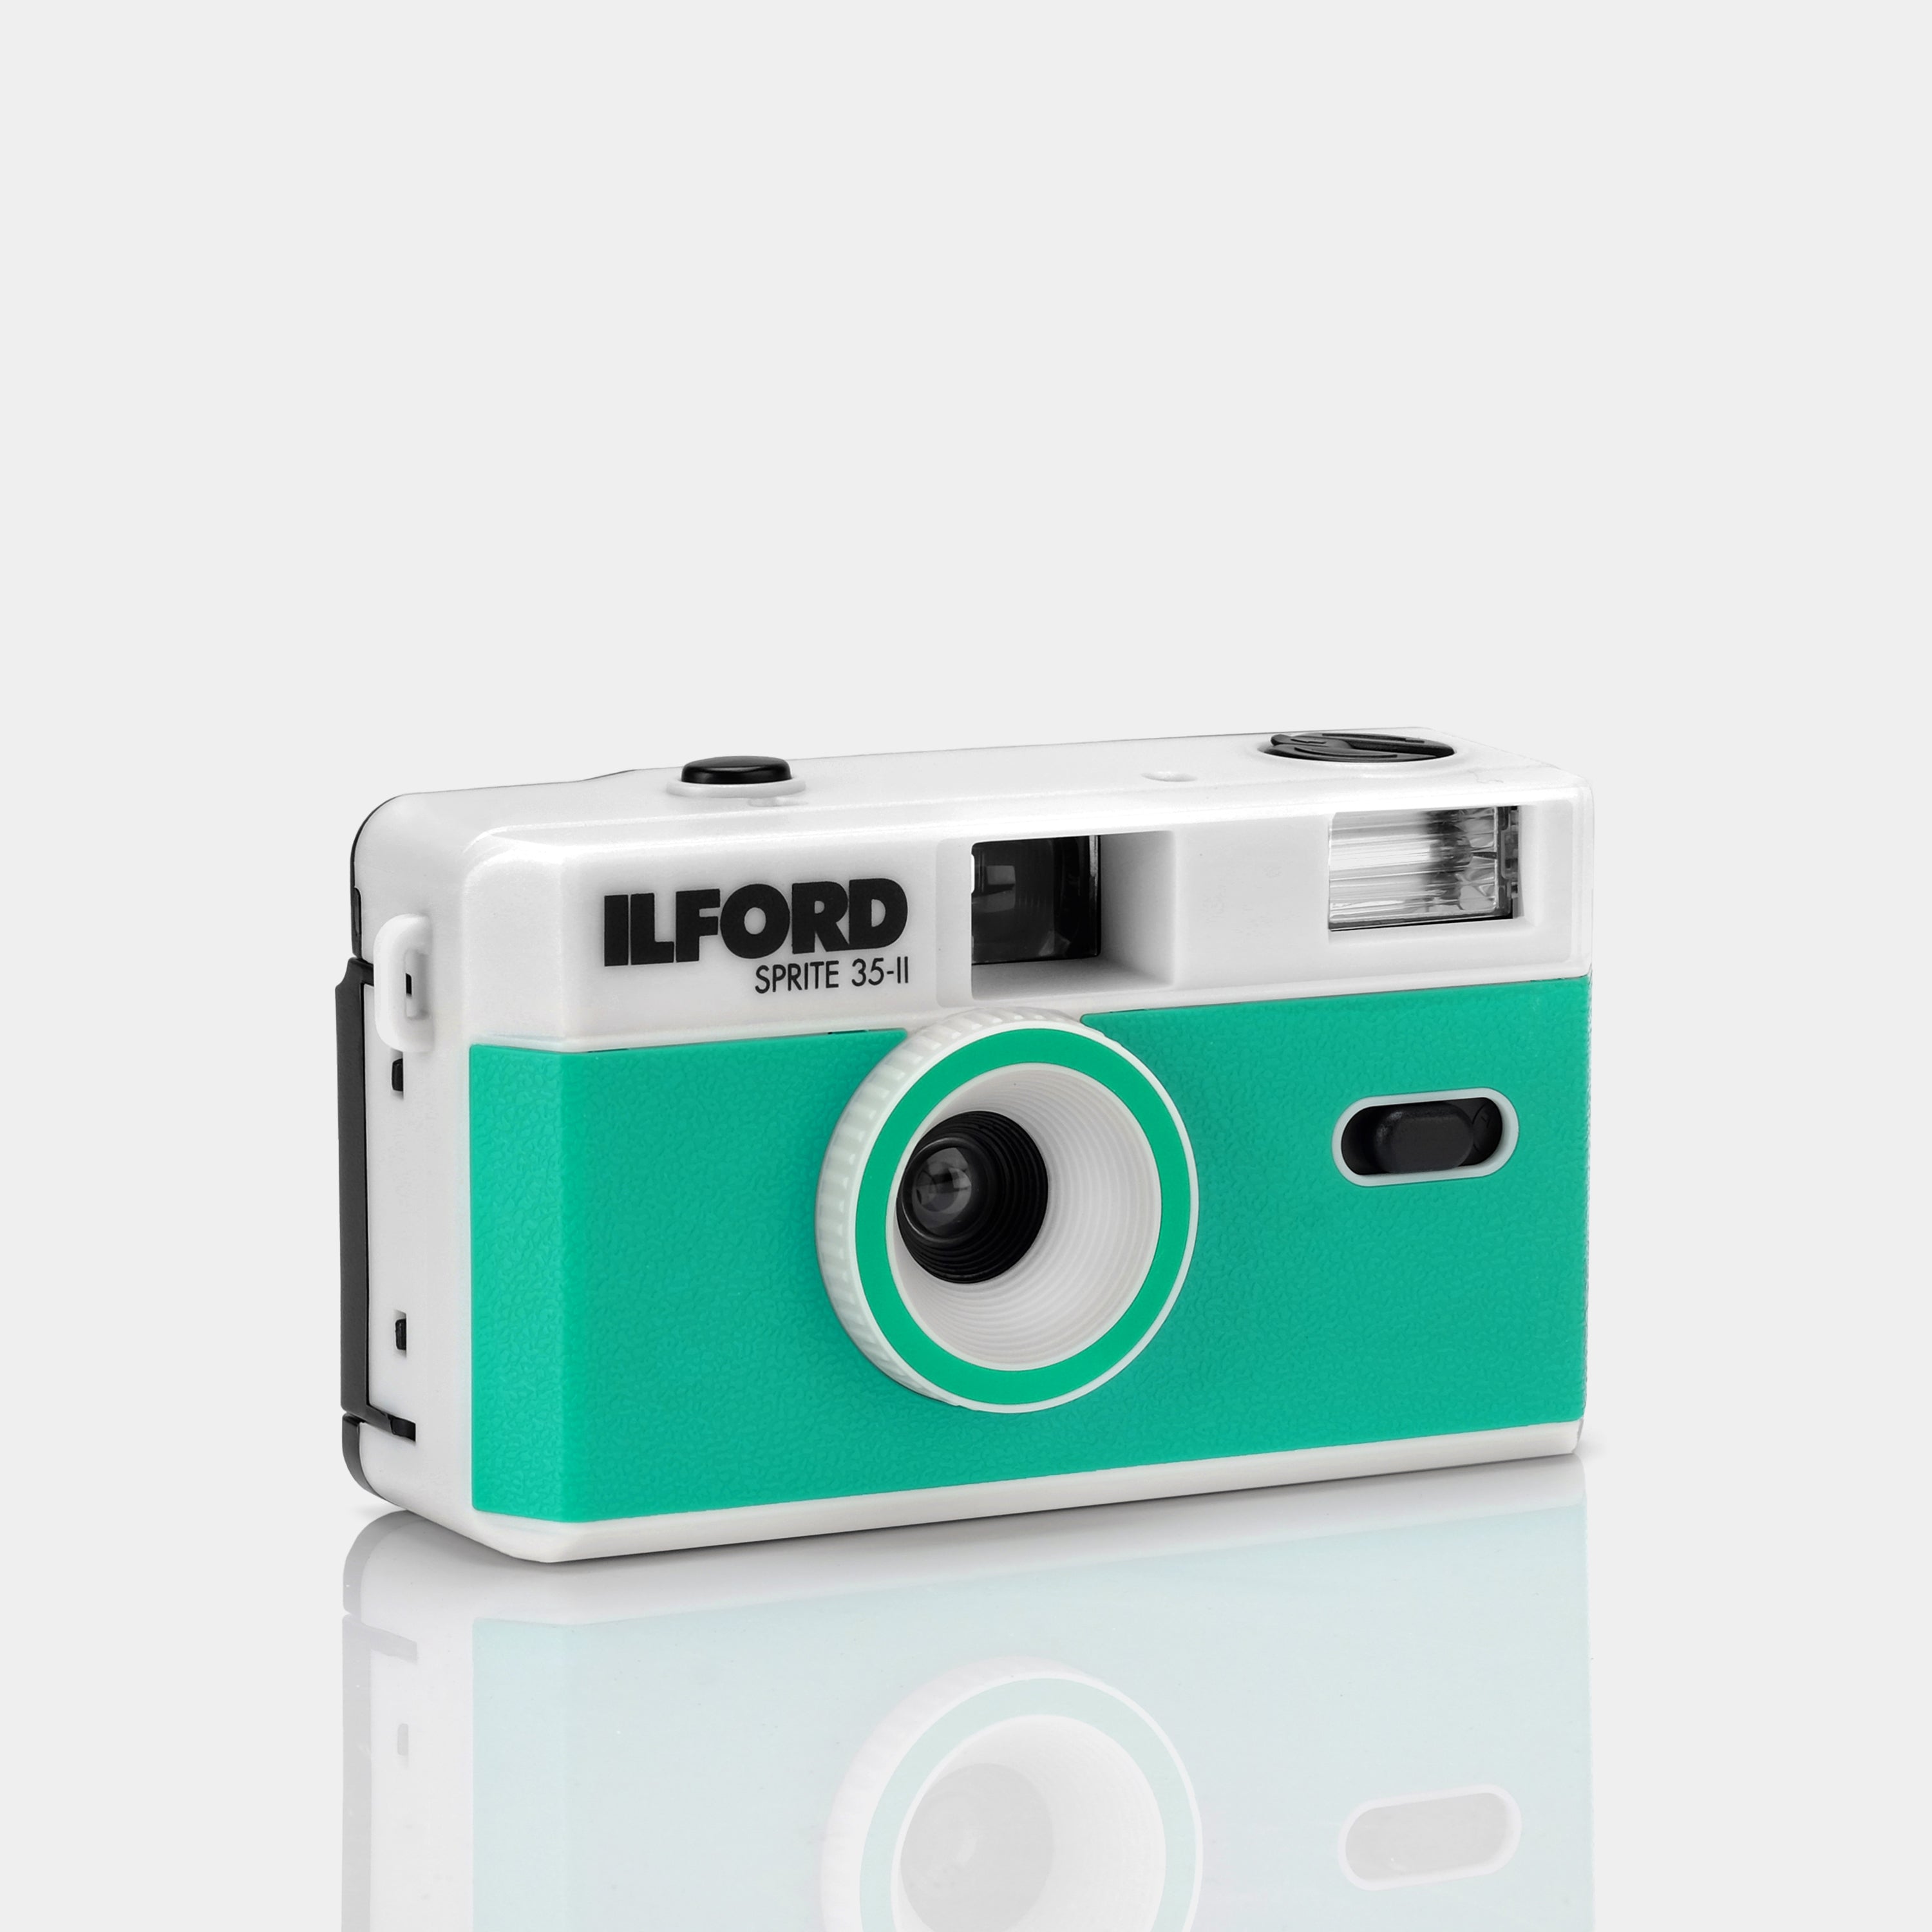 Ilford Sprite 35-II Reusable 35mm Point and Shoot Film Camera - Teal & Silver